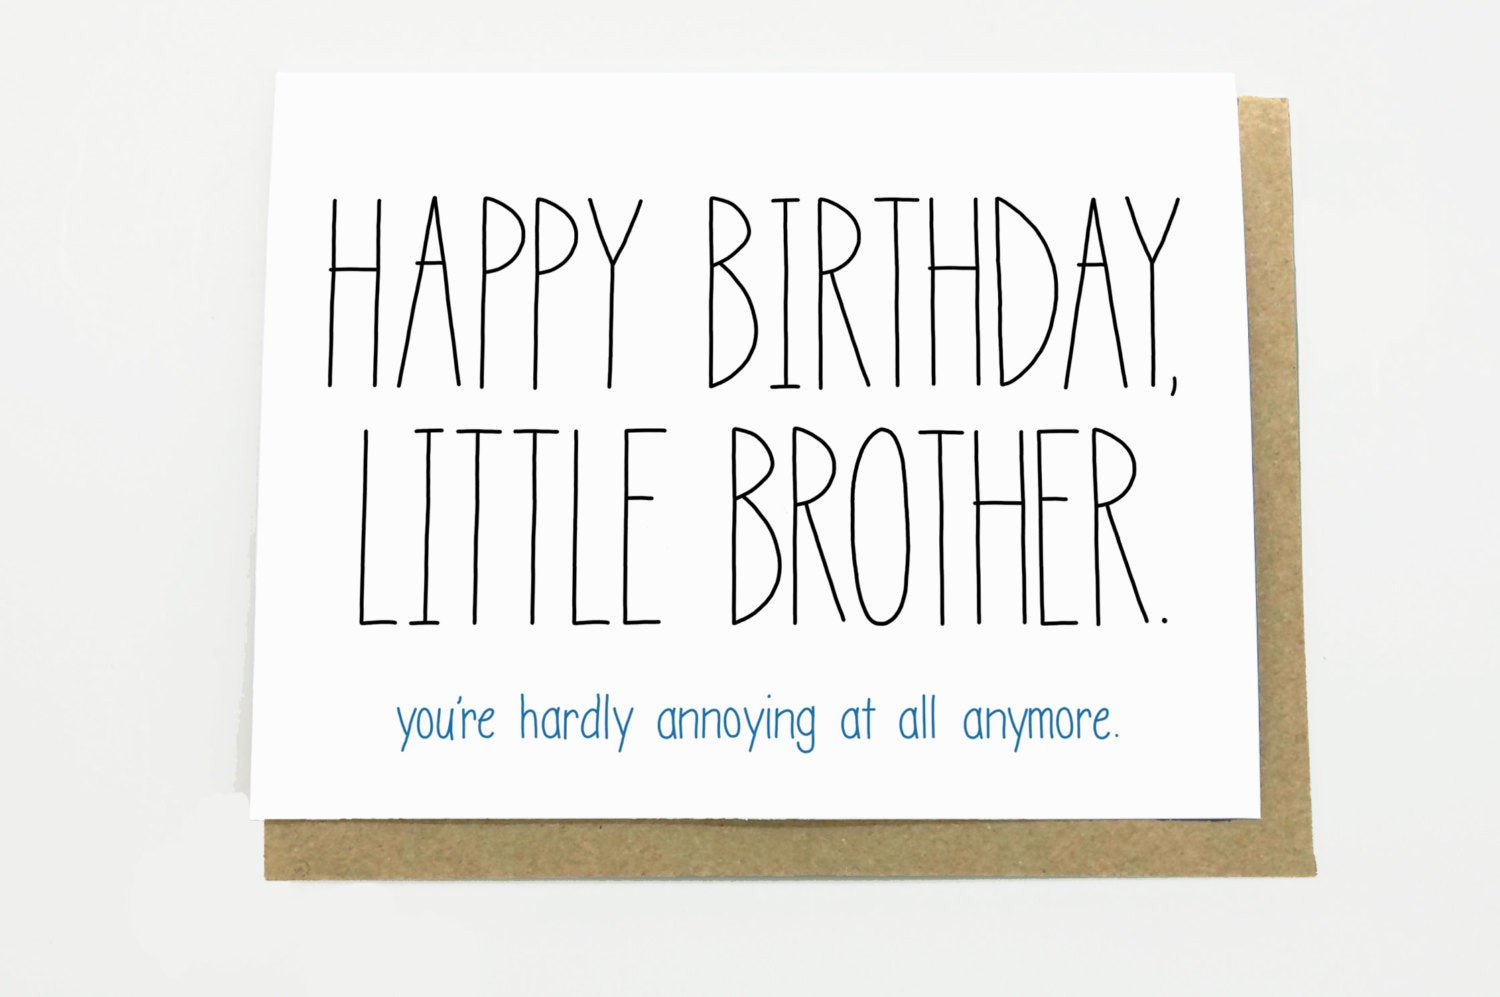 Birthday Wishes For Little Brother
 Funny Birthday Card Little Brother You re by CheekyKumquat